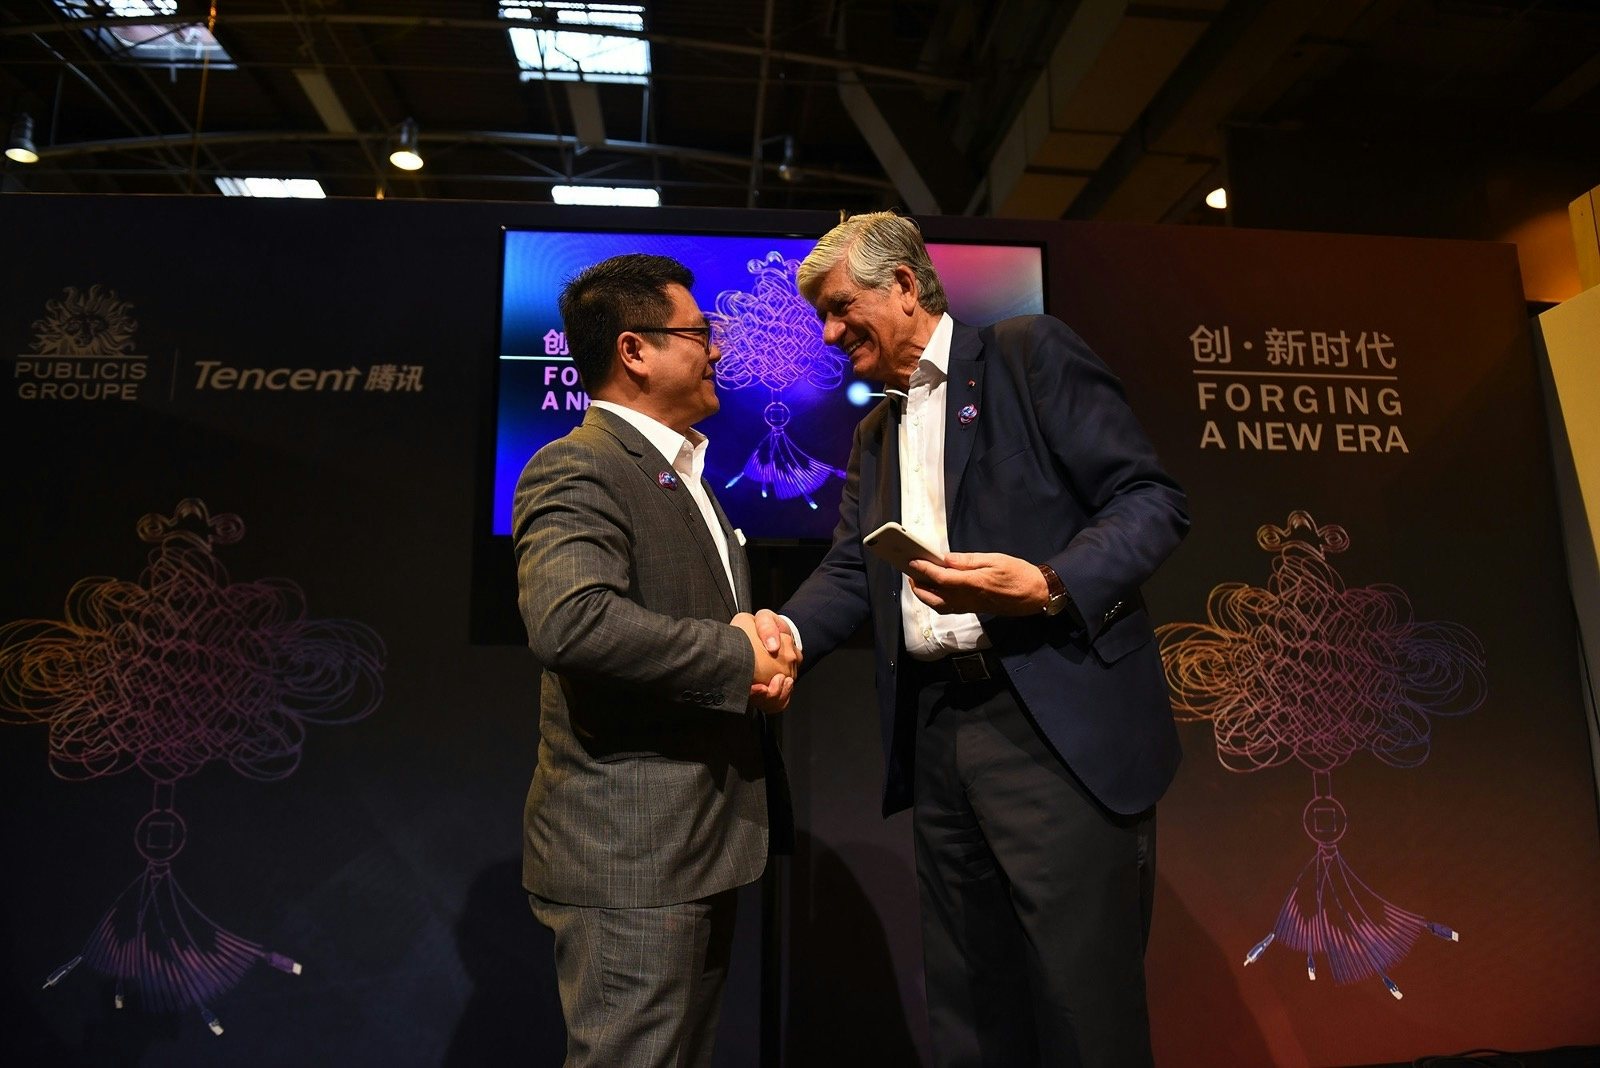 Chairman & CEO Maurice Levy and Senior Executive Vice President of Tencent SY Lau scan a WeChat QR code to officially mark the start of their partnership. (Tencent) 